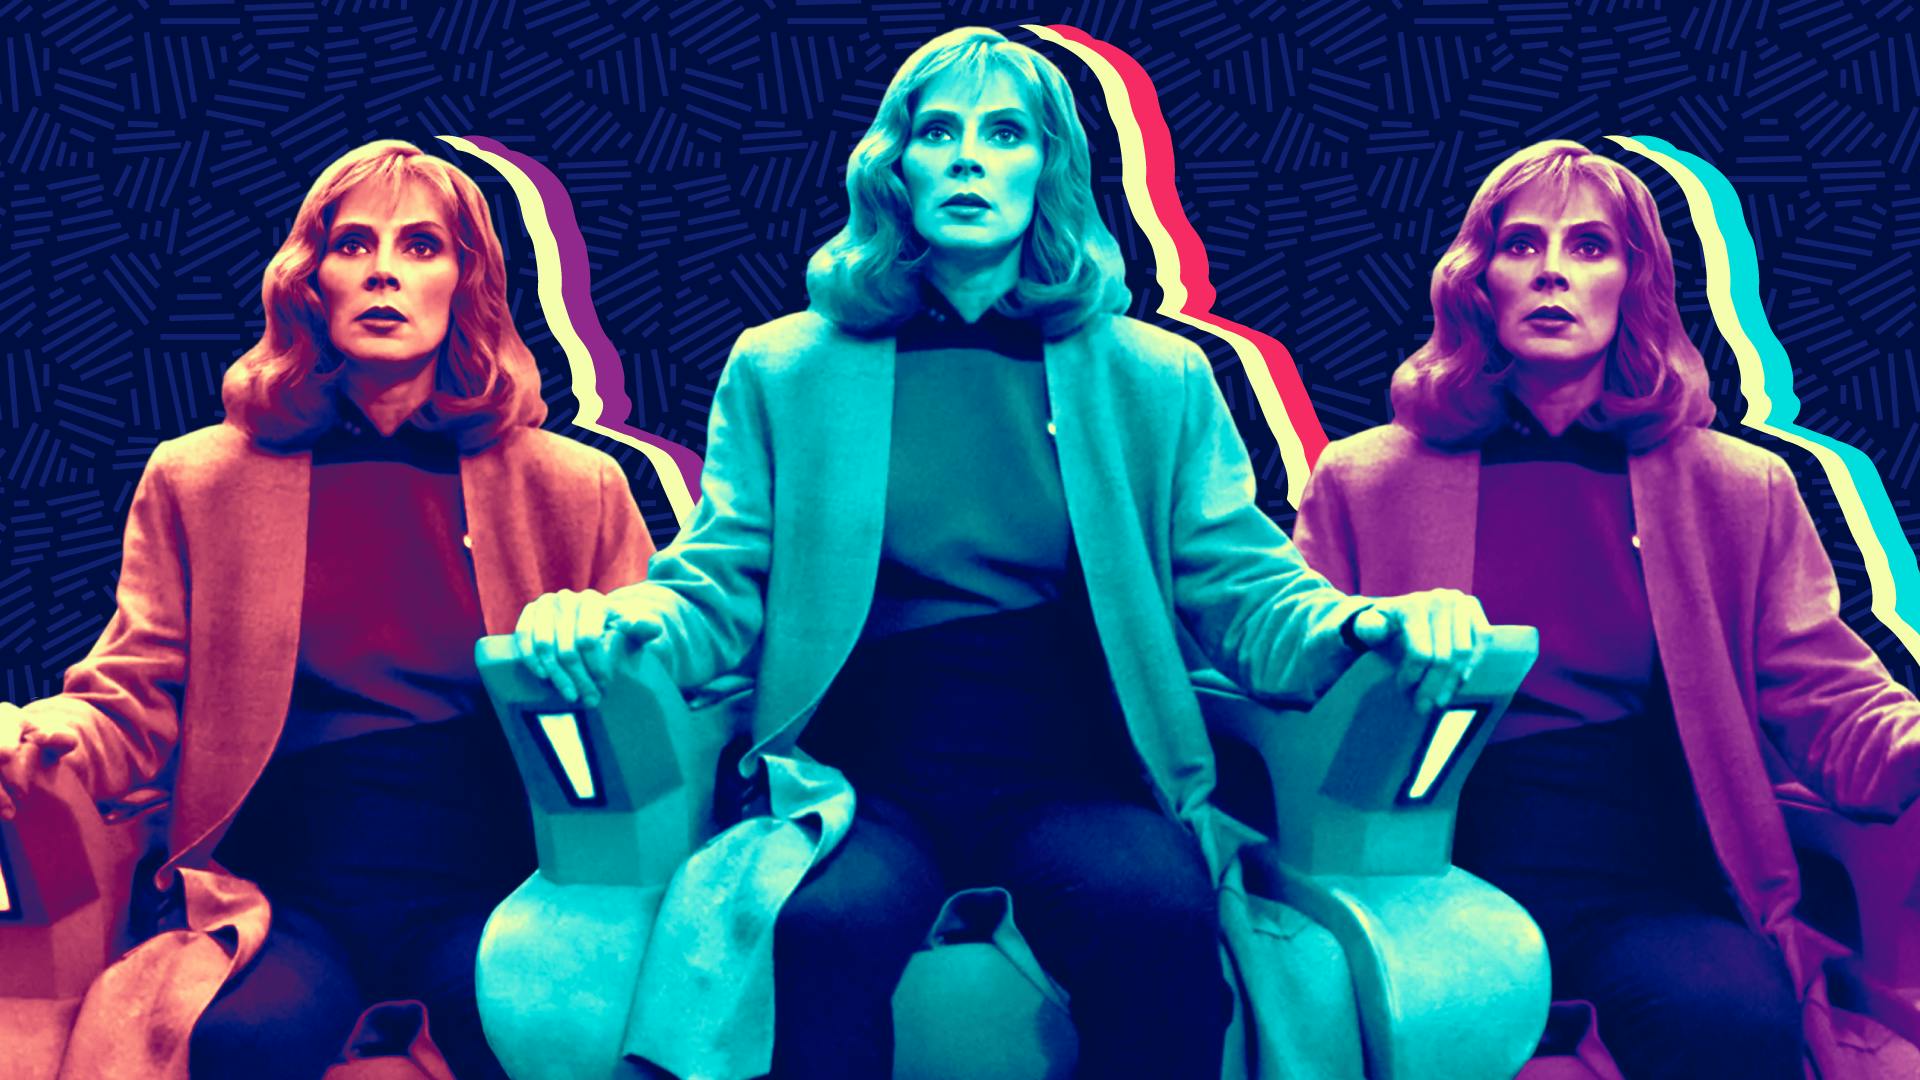 Stylized and filtered image of Beverly Crusher in the captain's chair